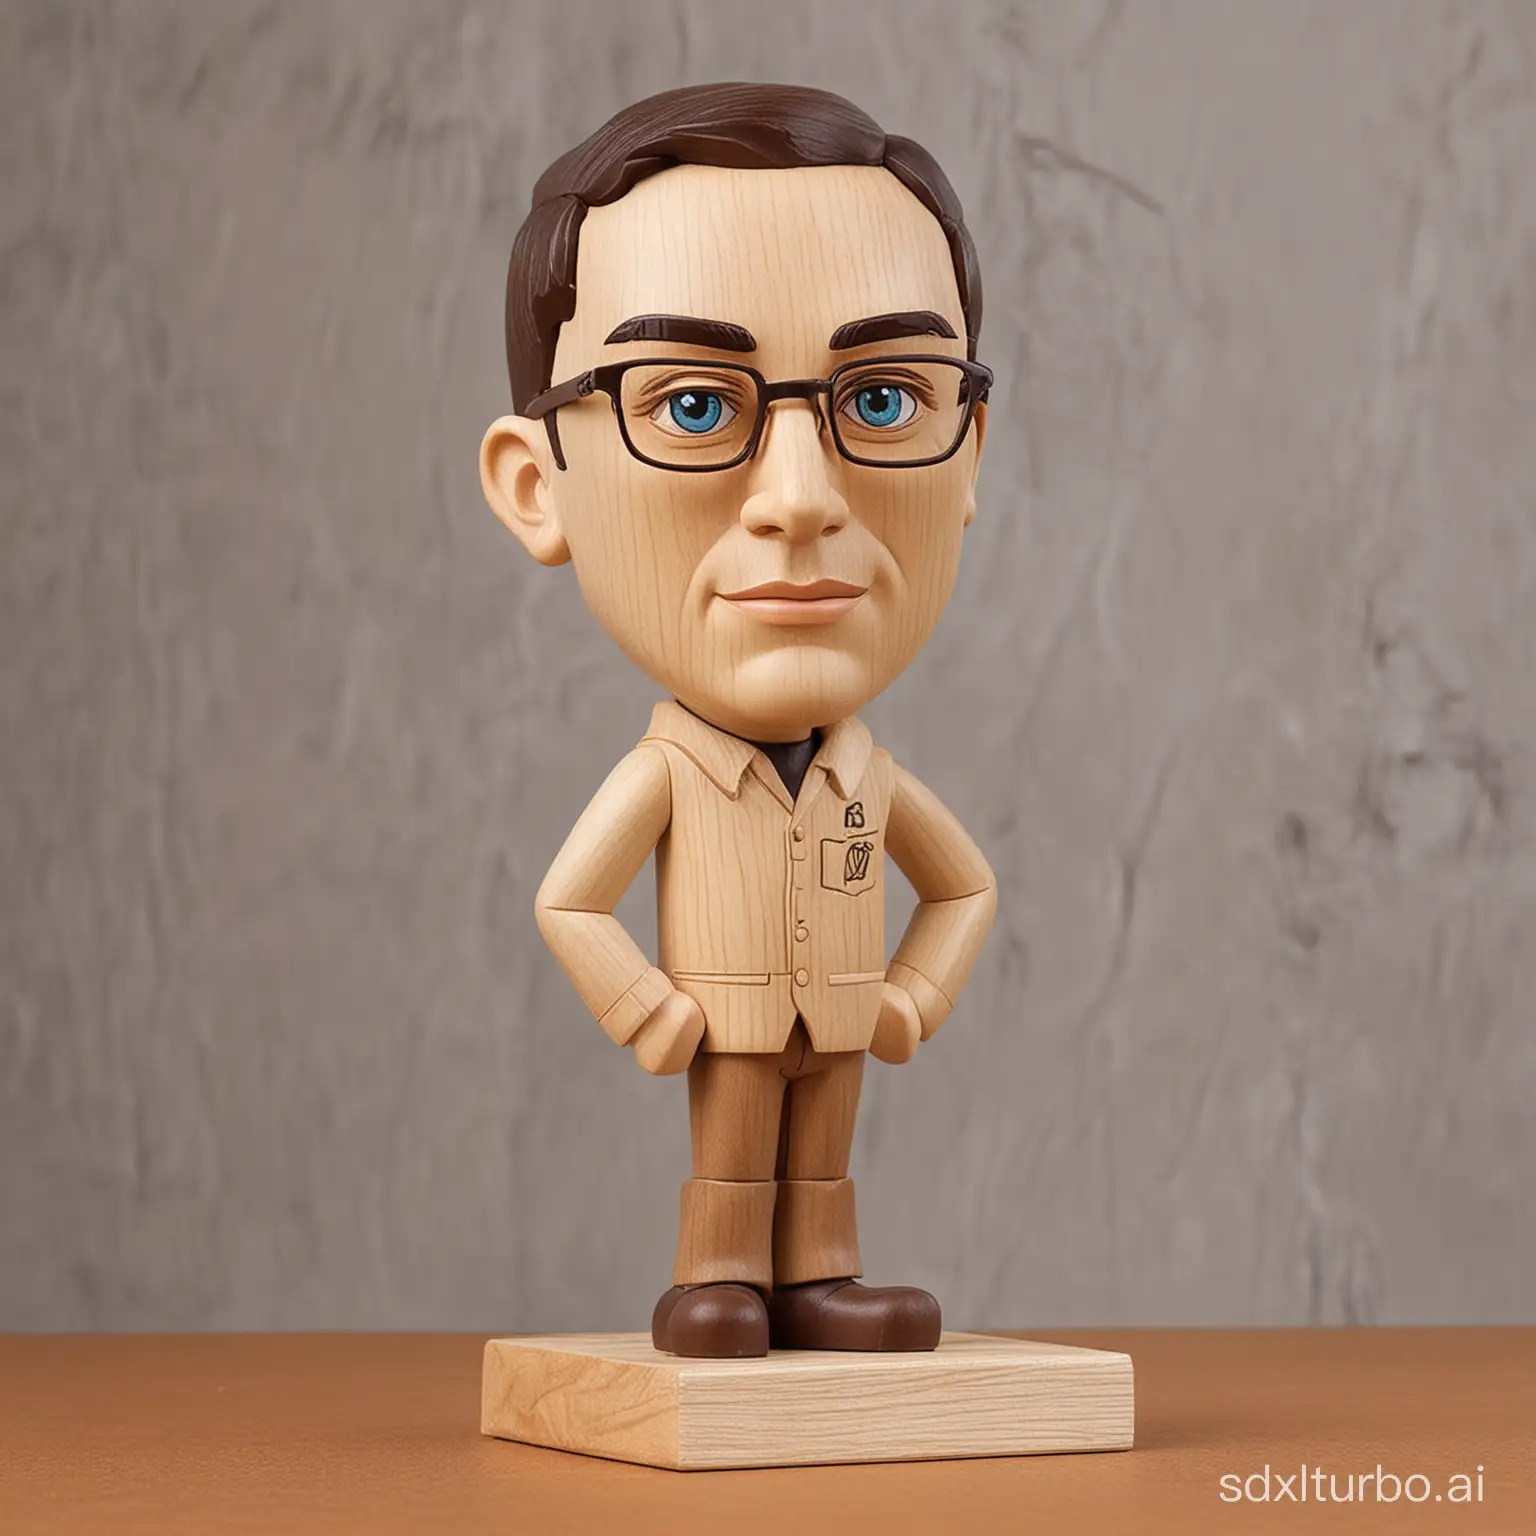 Sheldon cooper made of wood near a young man 